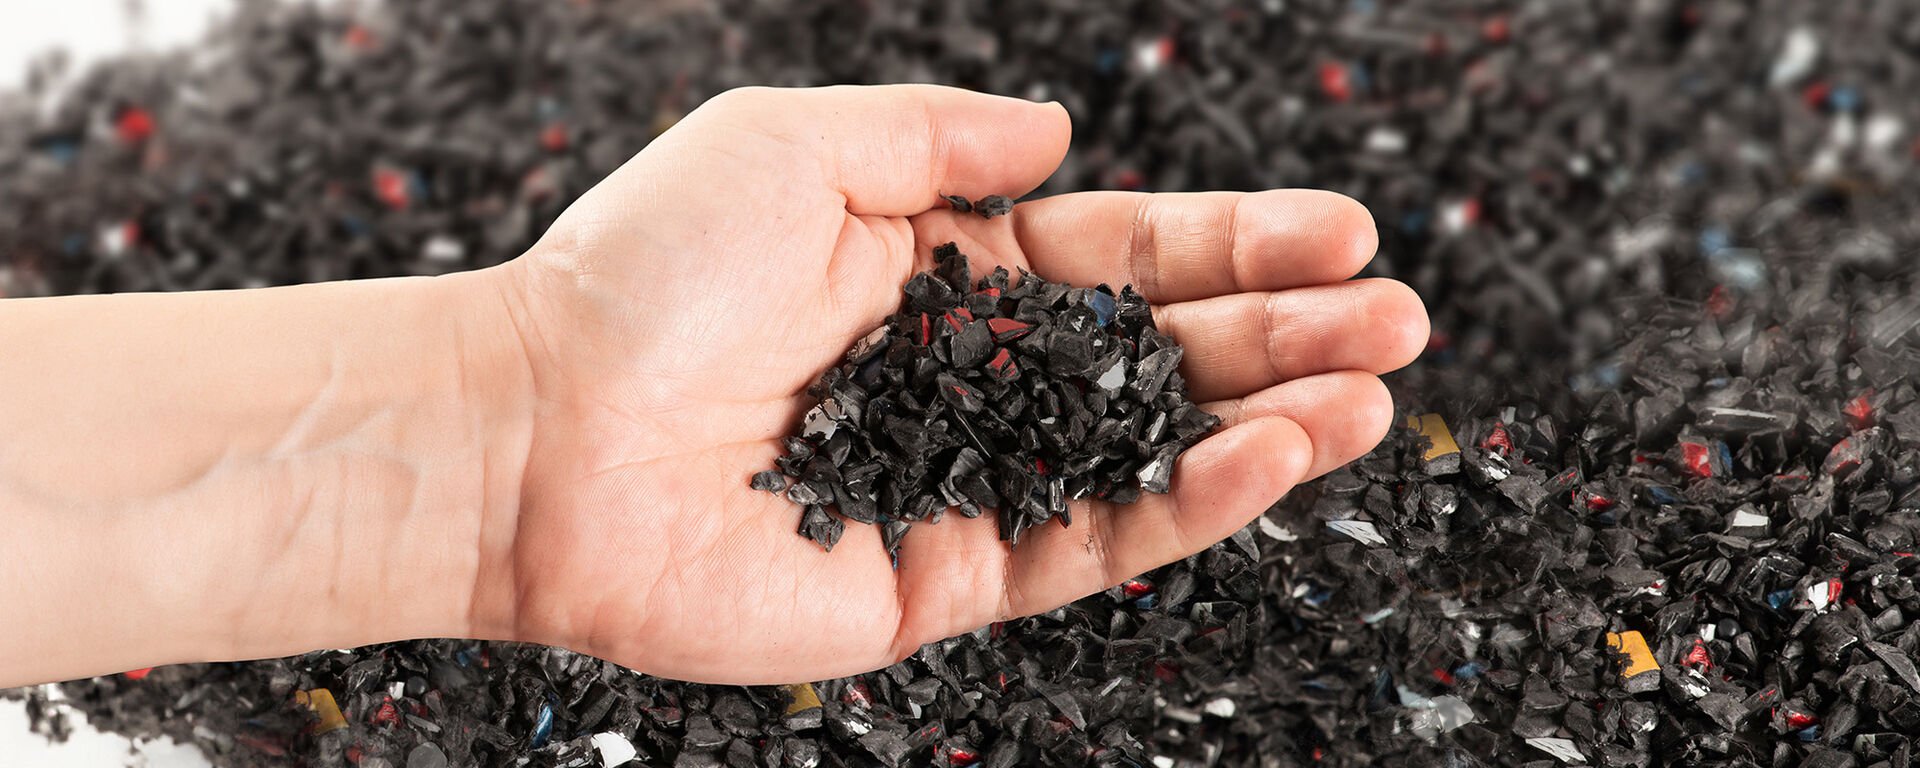 Photo of a hand holding irregular black plastic pellets for the purpose of recycling